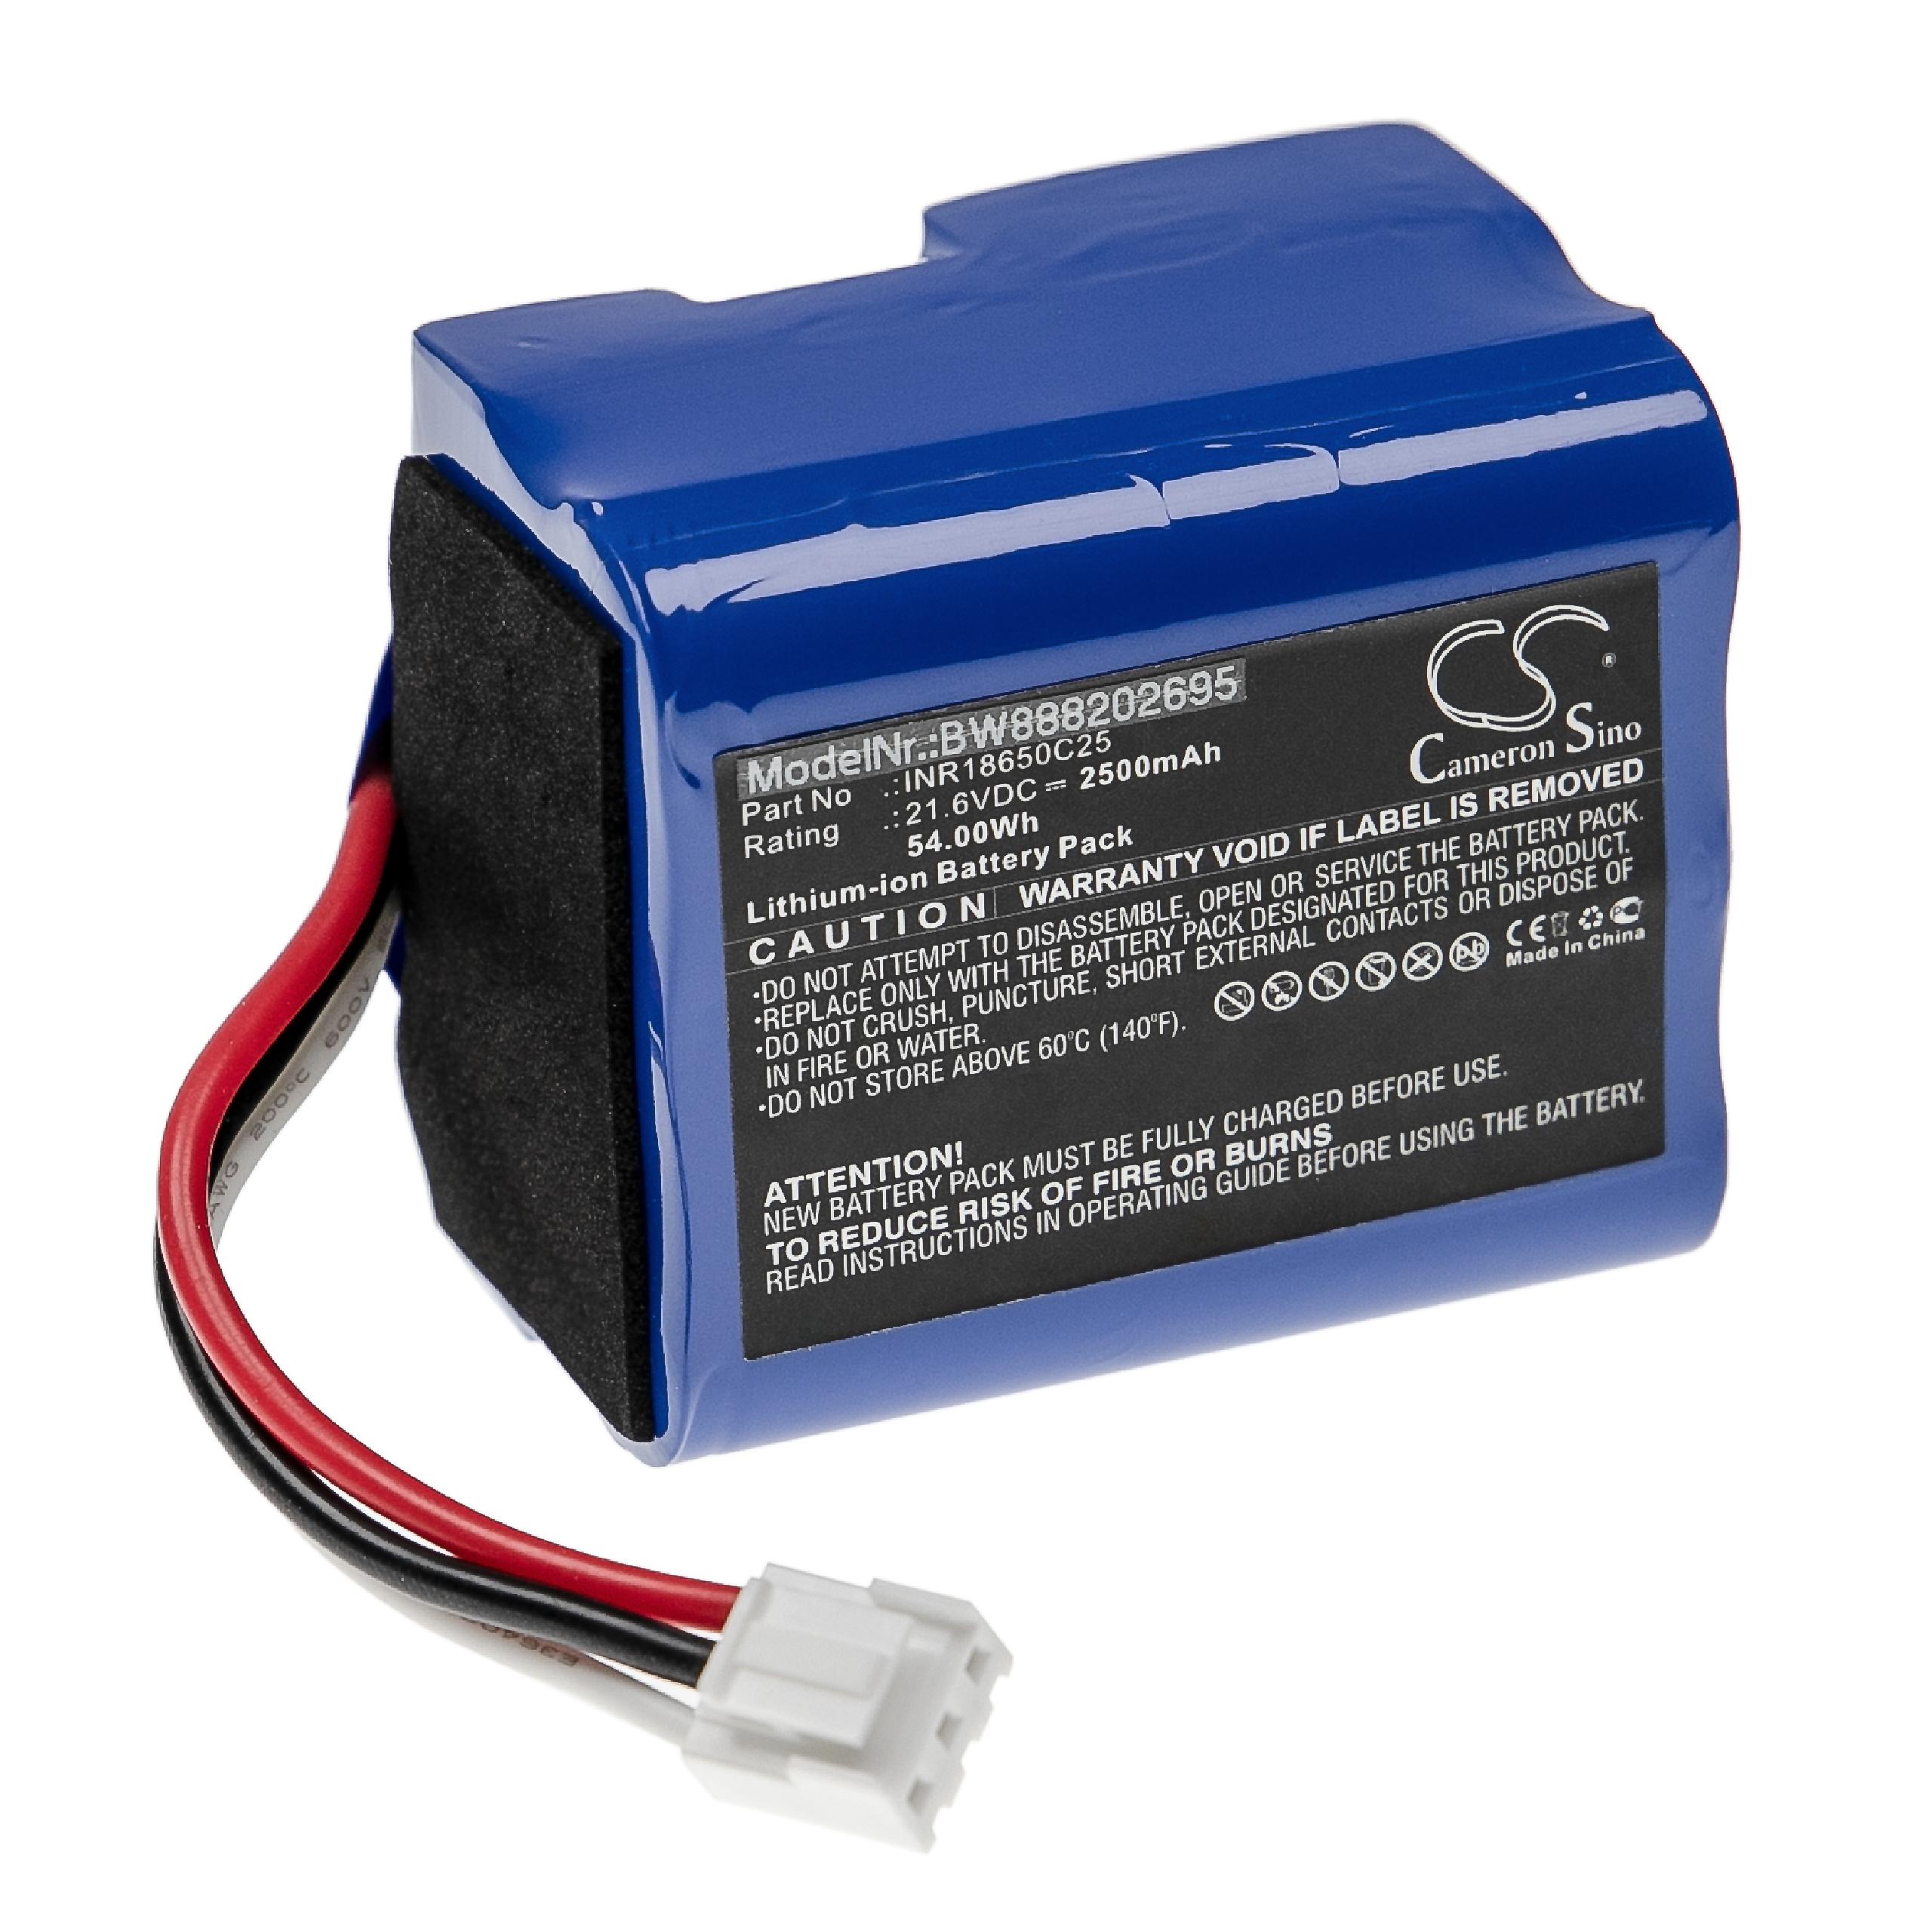 Battery Replacement for Philips 3000-018-25613, INR18650C25, 300002906404 for - 2500mAh, 21.6V, Li-Ion